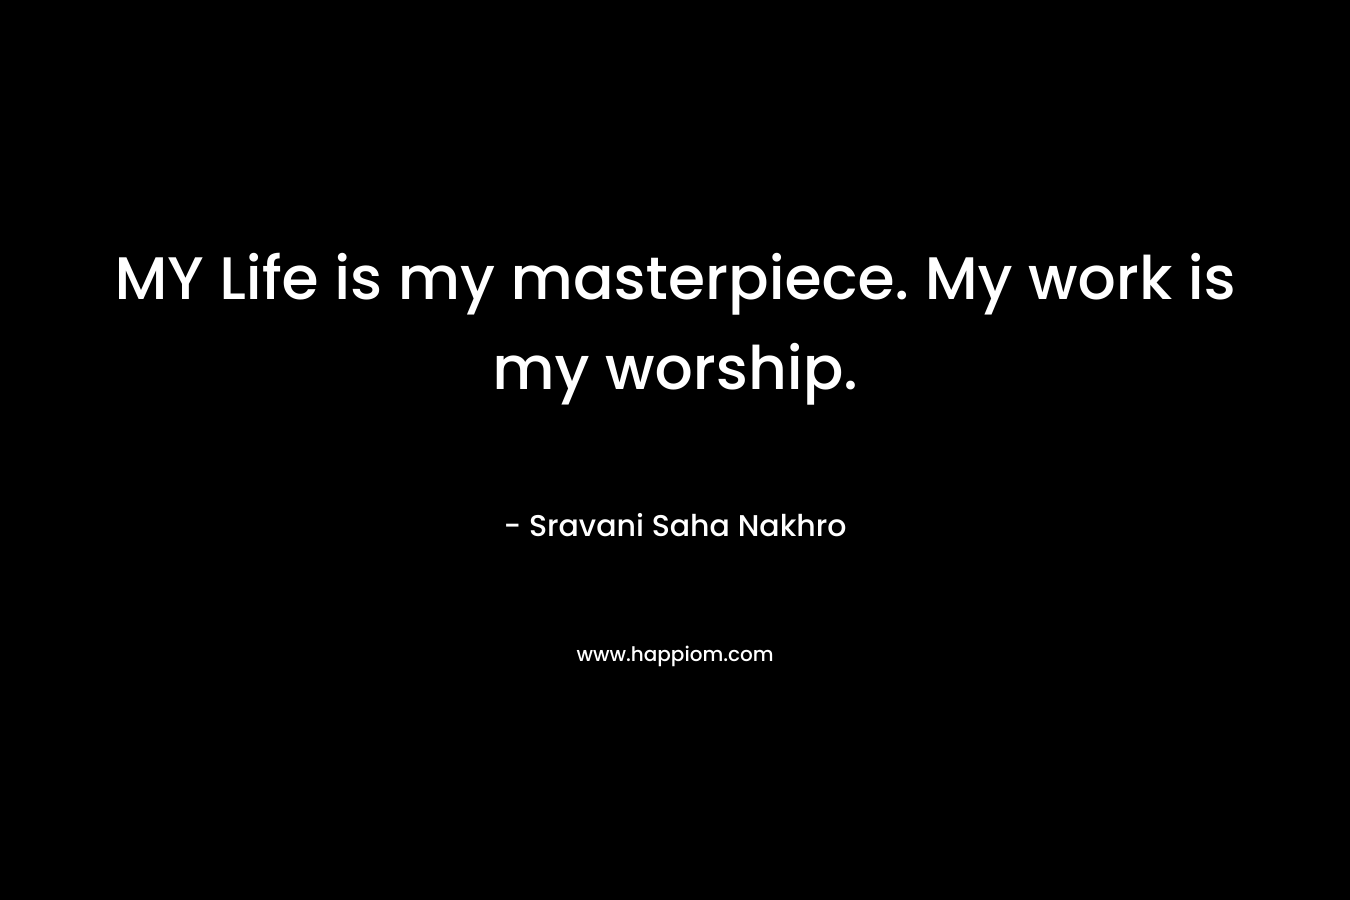 MY Life is my masterpiece. My work is my worship.